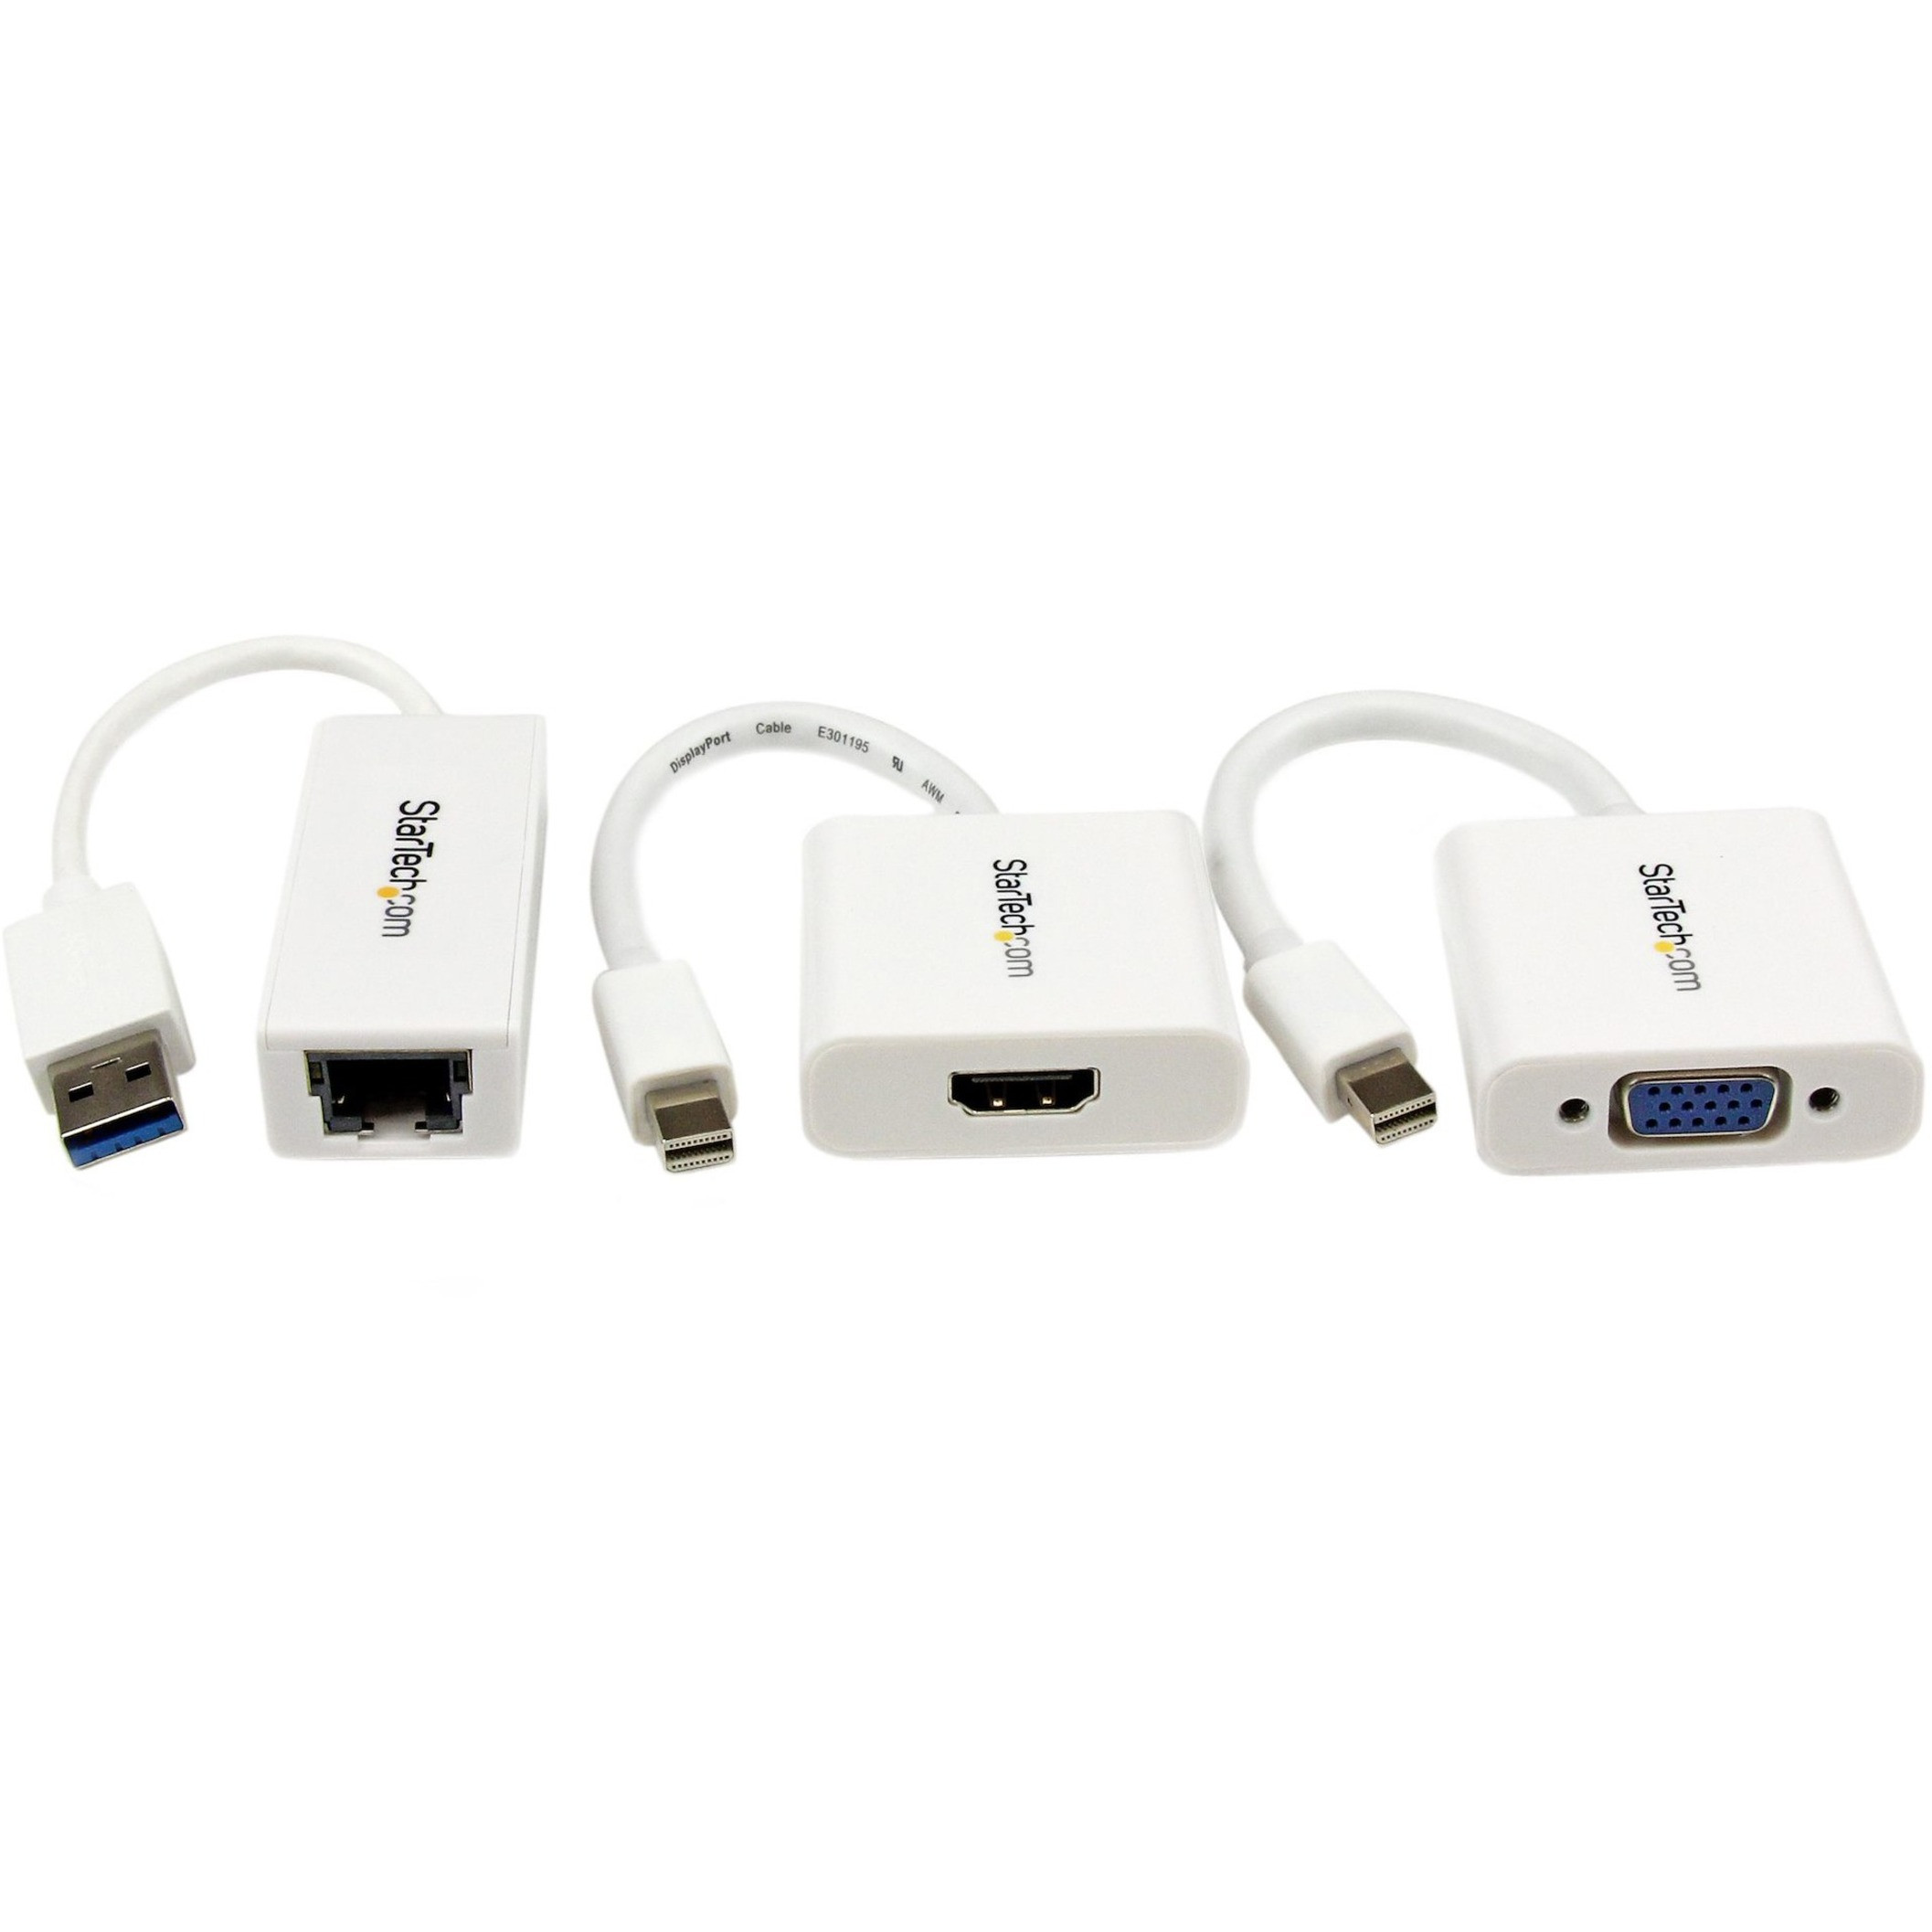 Startech .com Macbook Air Accessories KitMDP to VGA / HDMI and USB 3.0 Gigabit Ethernet AdapterConnect your MacBook Air® to a boardr... - Corporate Armor